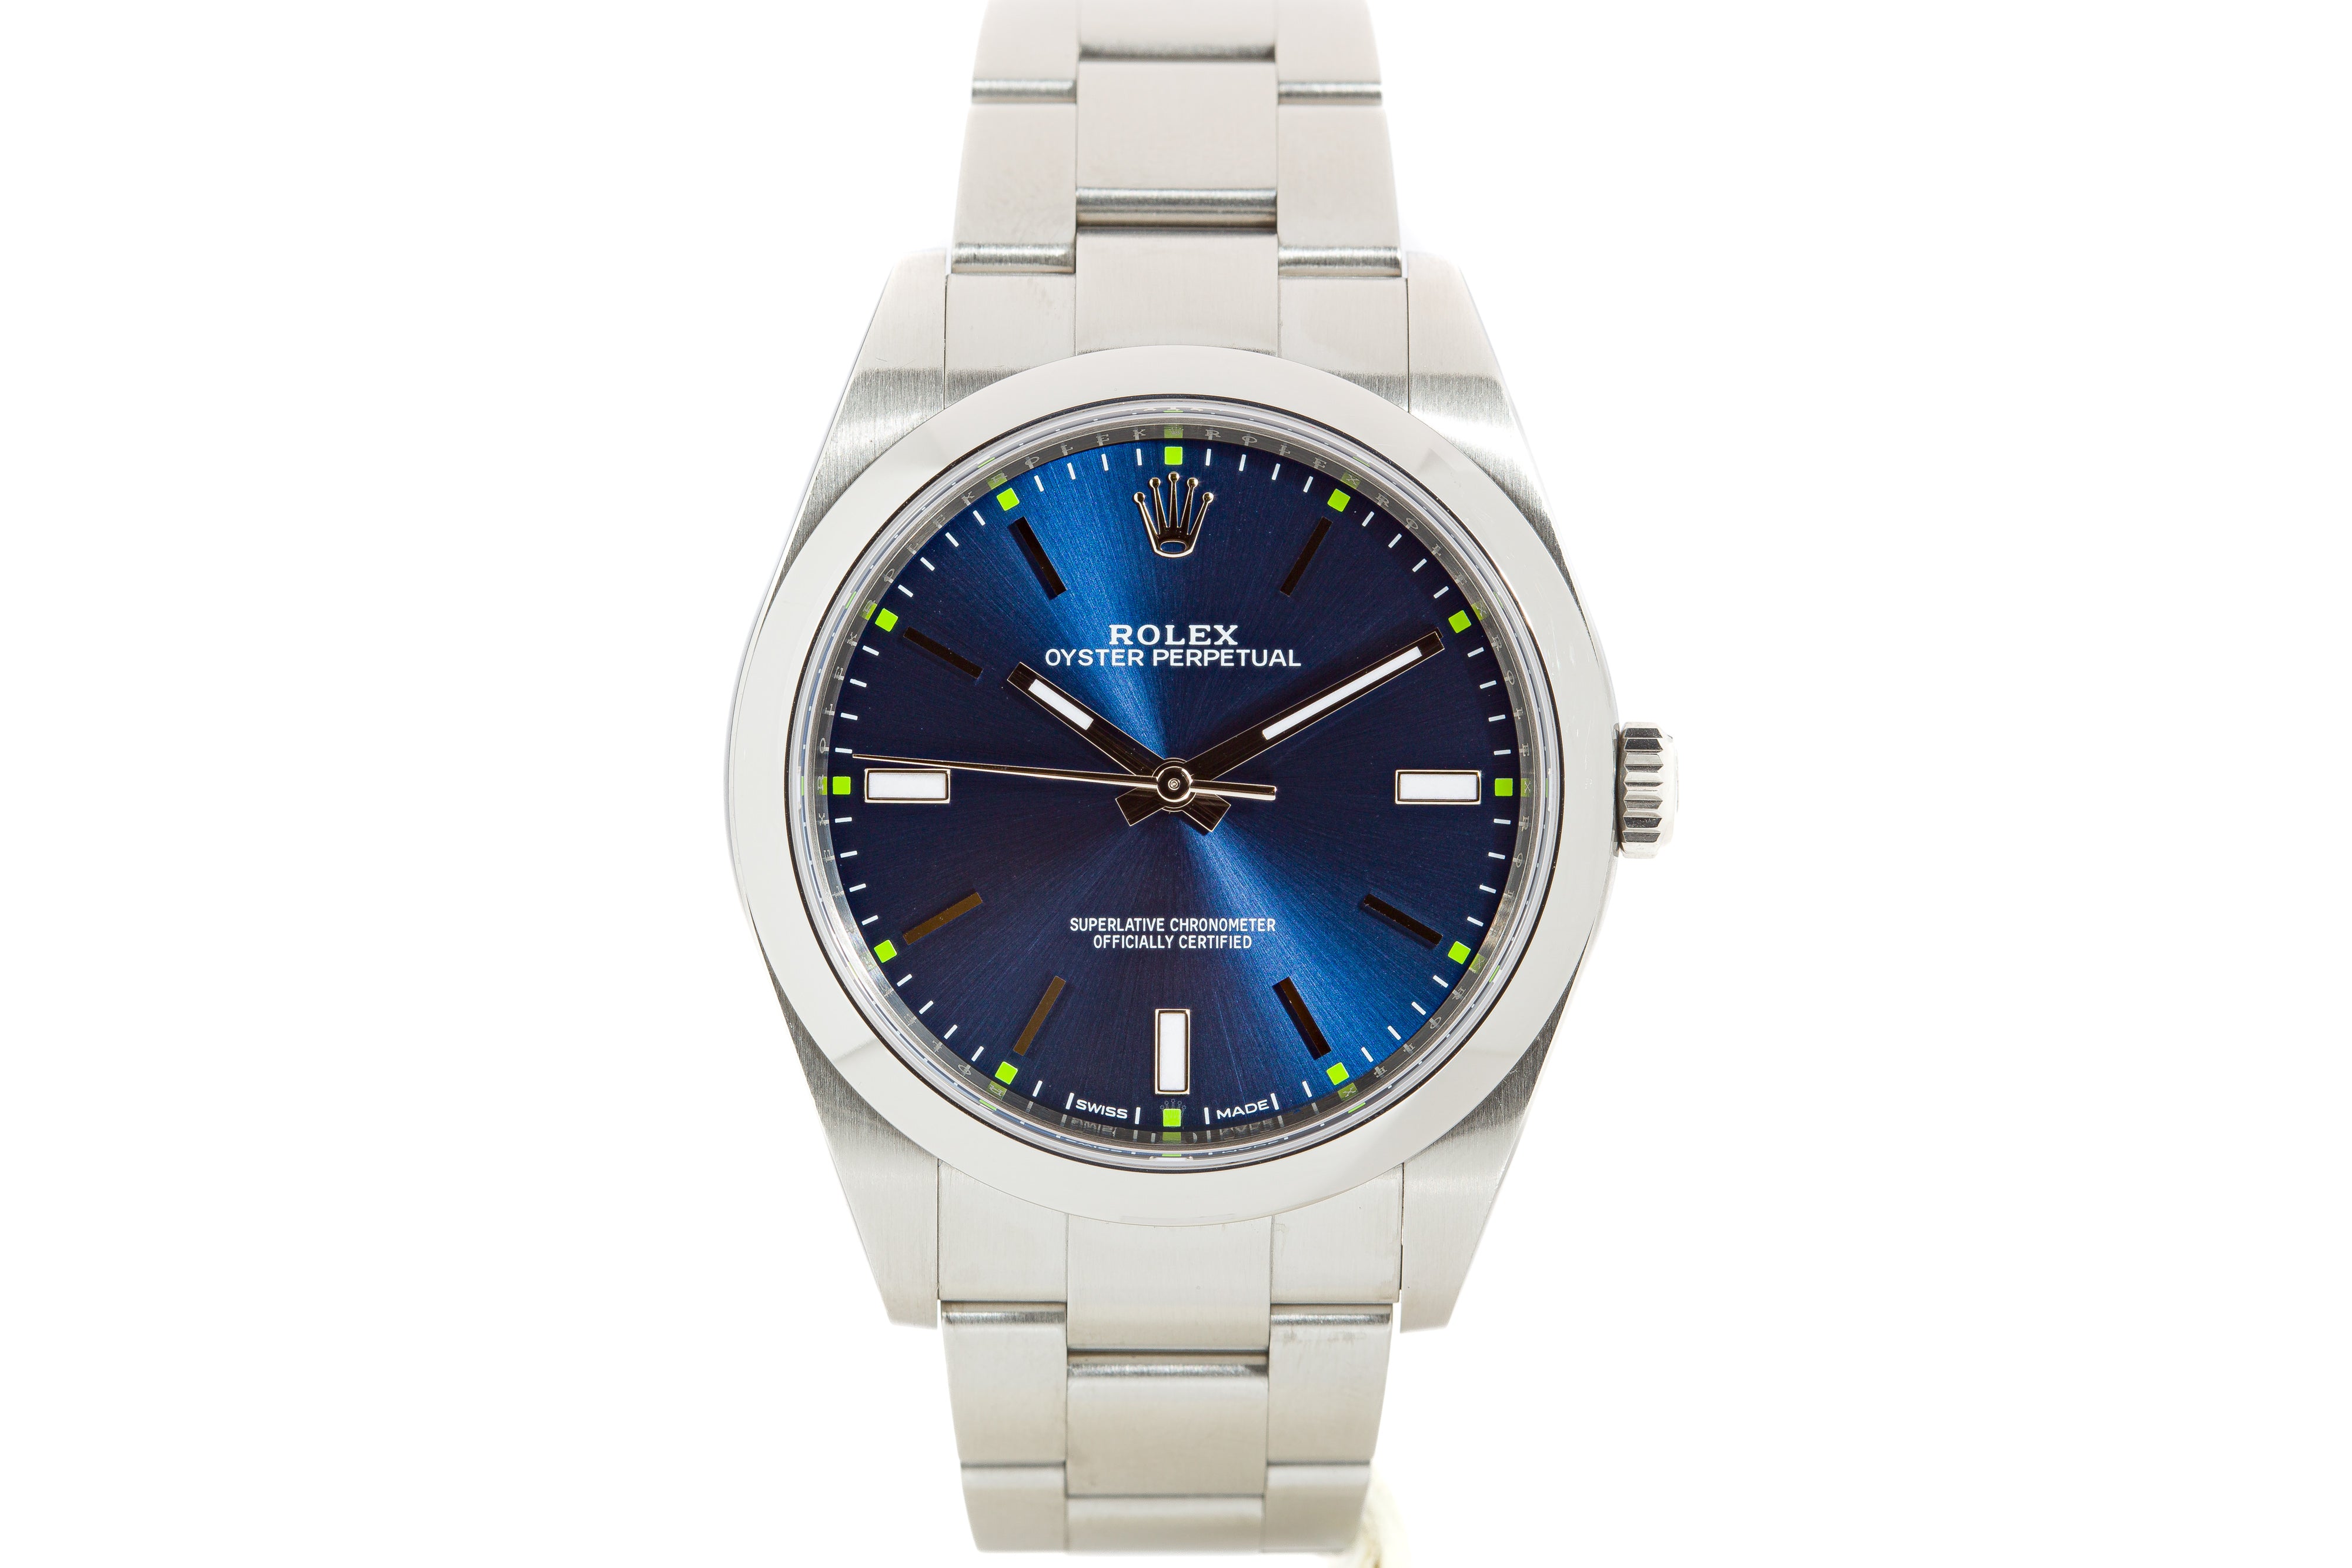 sjælden ustabil forfatter HQ Milton - 2017 Rolex Oyster Perpetual 114300 Blue Dial Box, Card Hangtag,  Inventory #A5028, For Sale